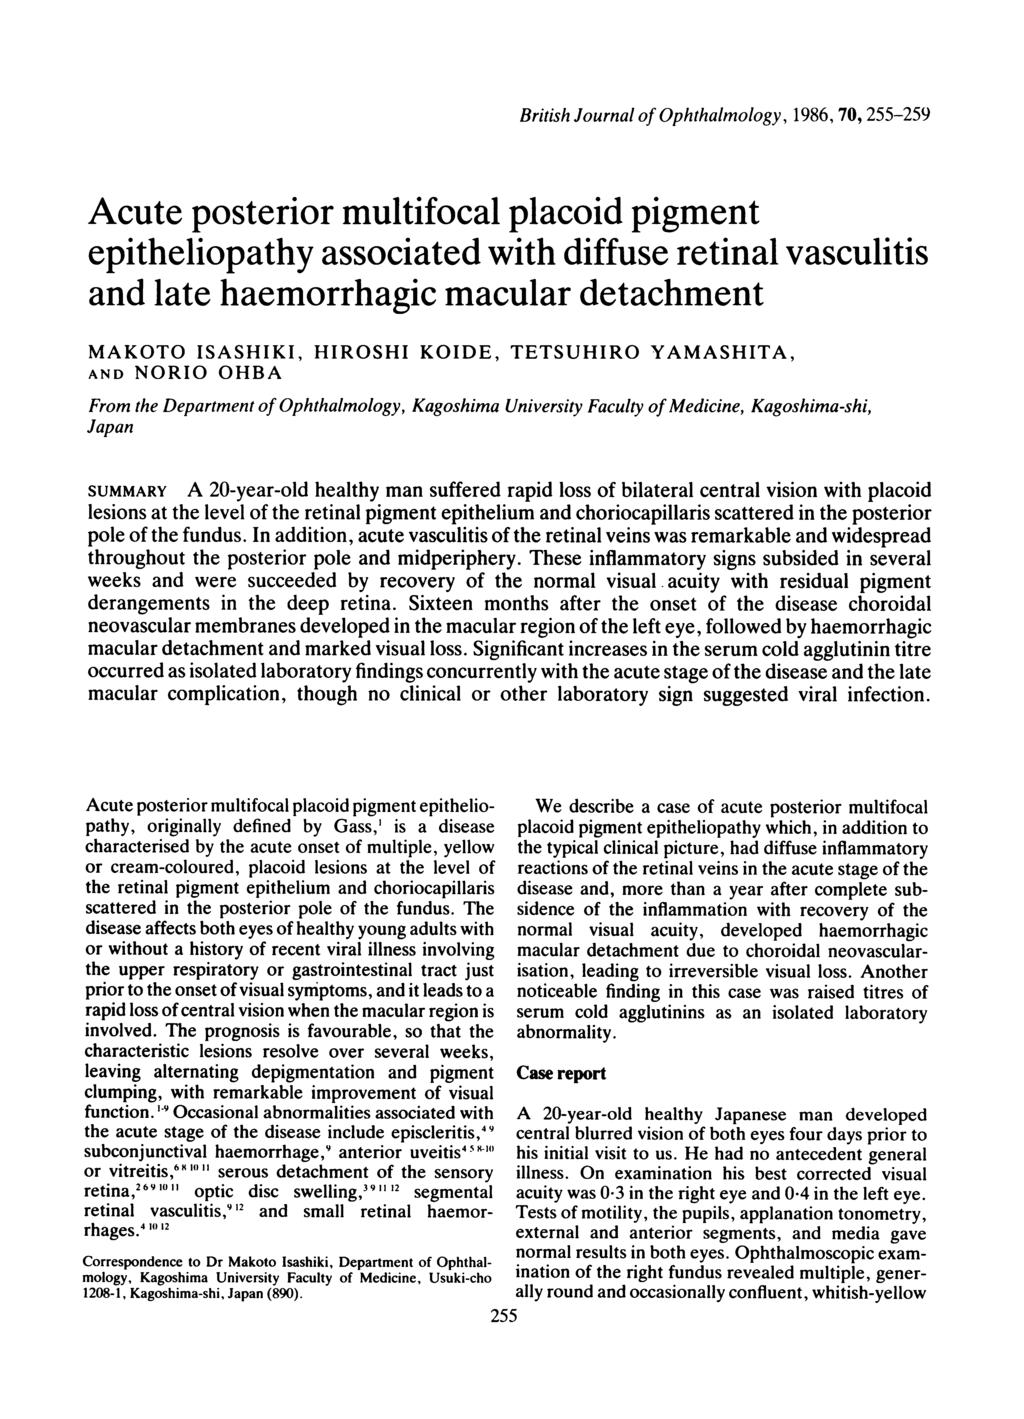 British Journal of Ophthalmology, 1986, 70, 255-259 Acute posterior multifocal placoid pigment epitheliopathy associated with diffuse retinal vasculitis and late haemorrhagic macular detachment